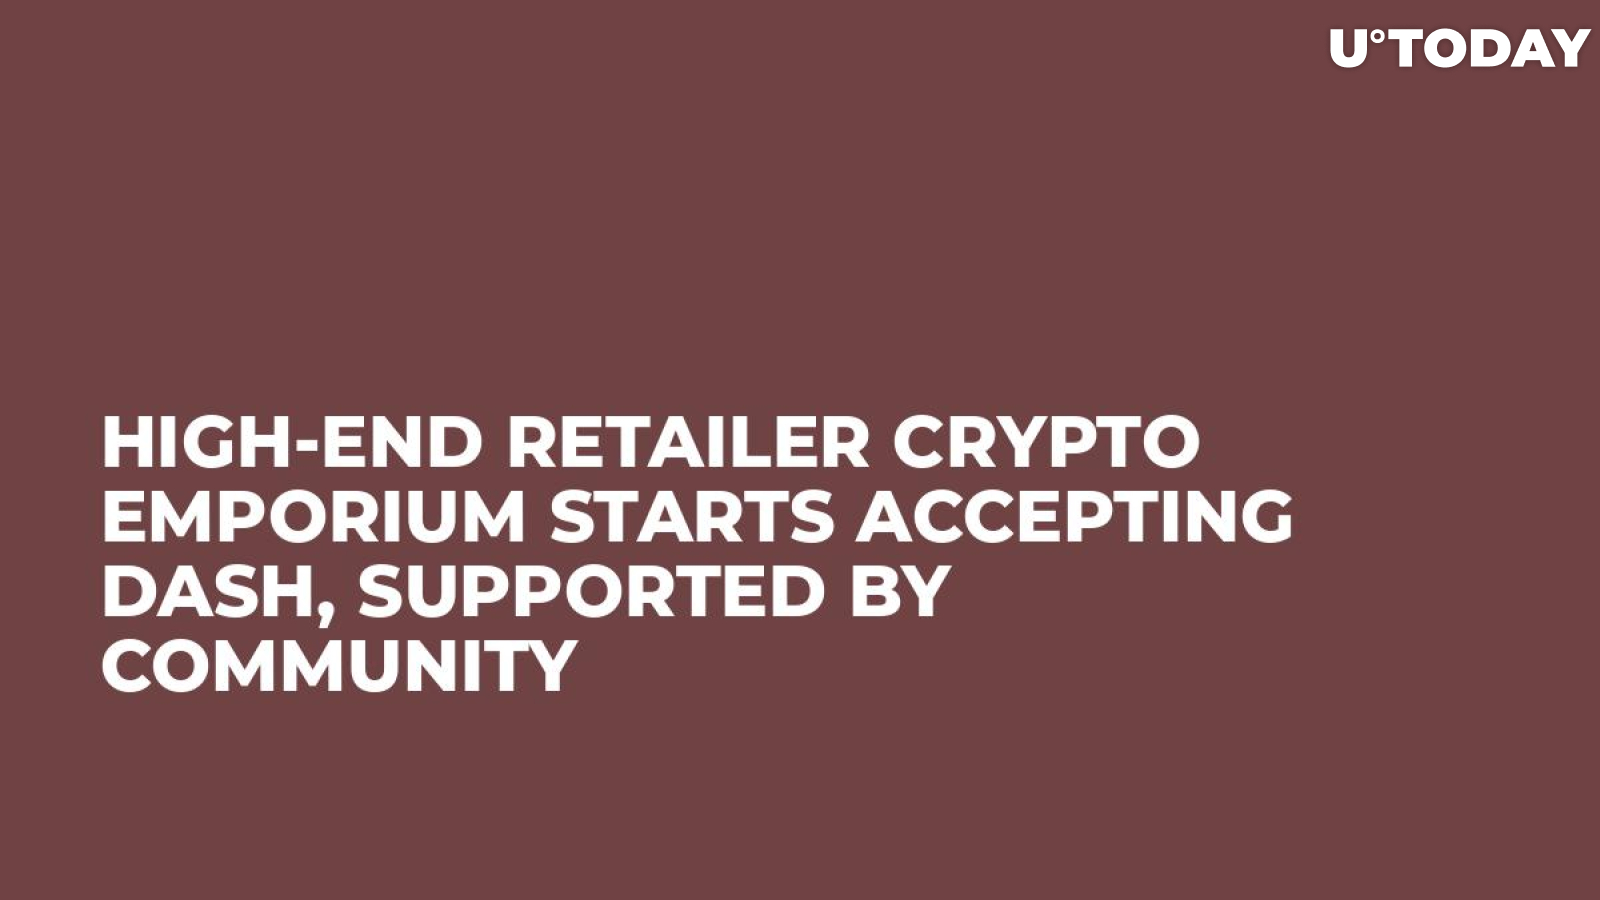 High-End Retailer Crypto Emporium Starts Accepting Dash, Supported by Community